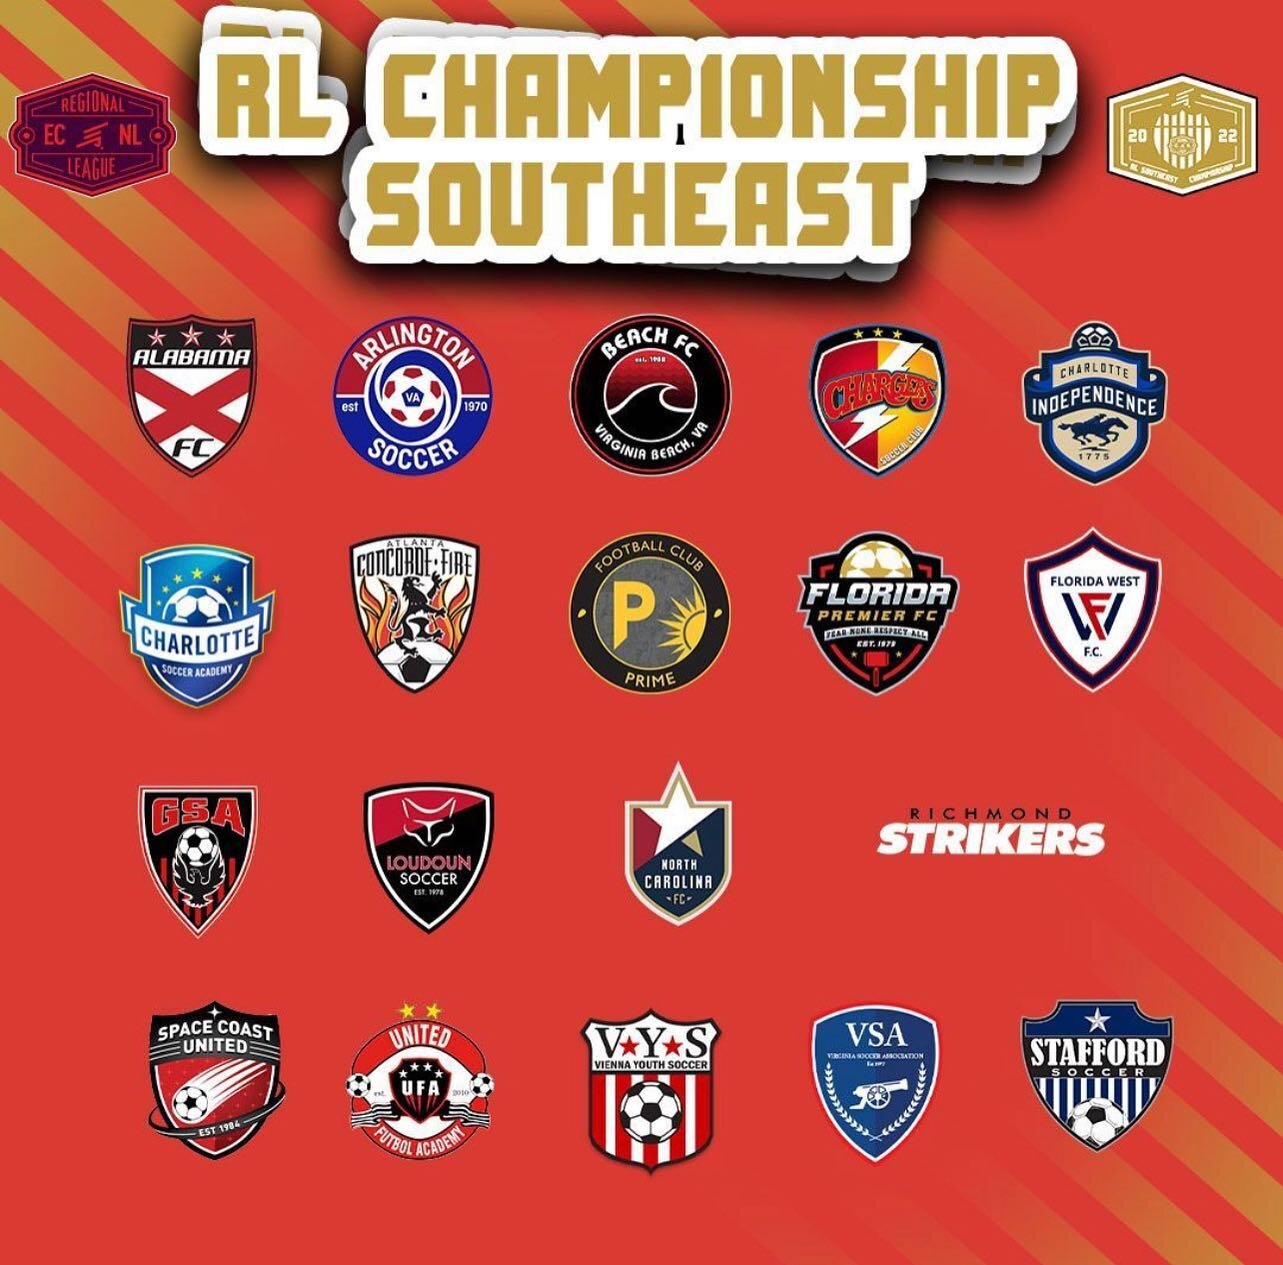 Good Luck to our 09 Girls at the Southeast Championships in Greensboro, NC this weekend 💪🏼⚽️ #1inSWFL #FLWestFC #SuccessisaChoice #bmwofnaples